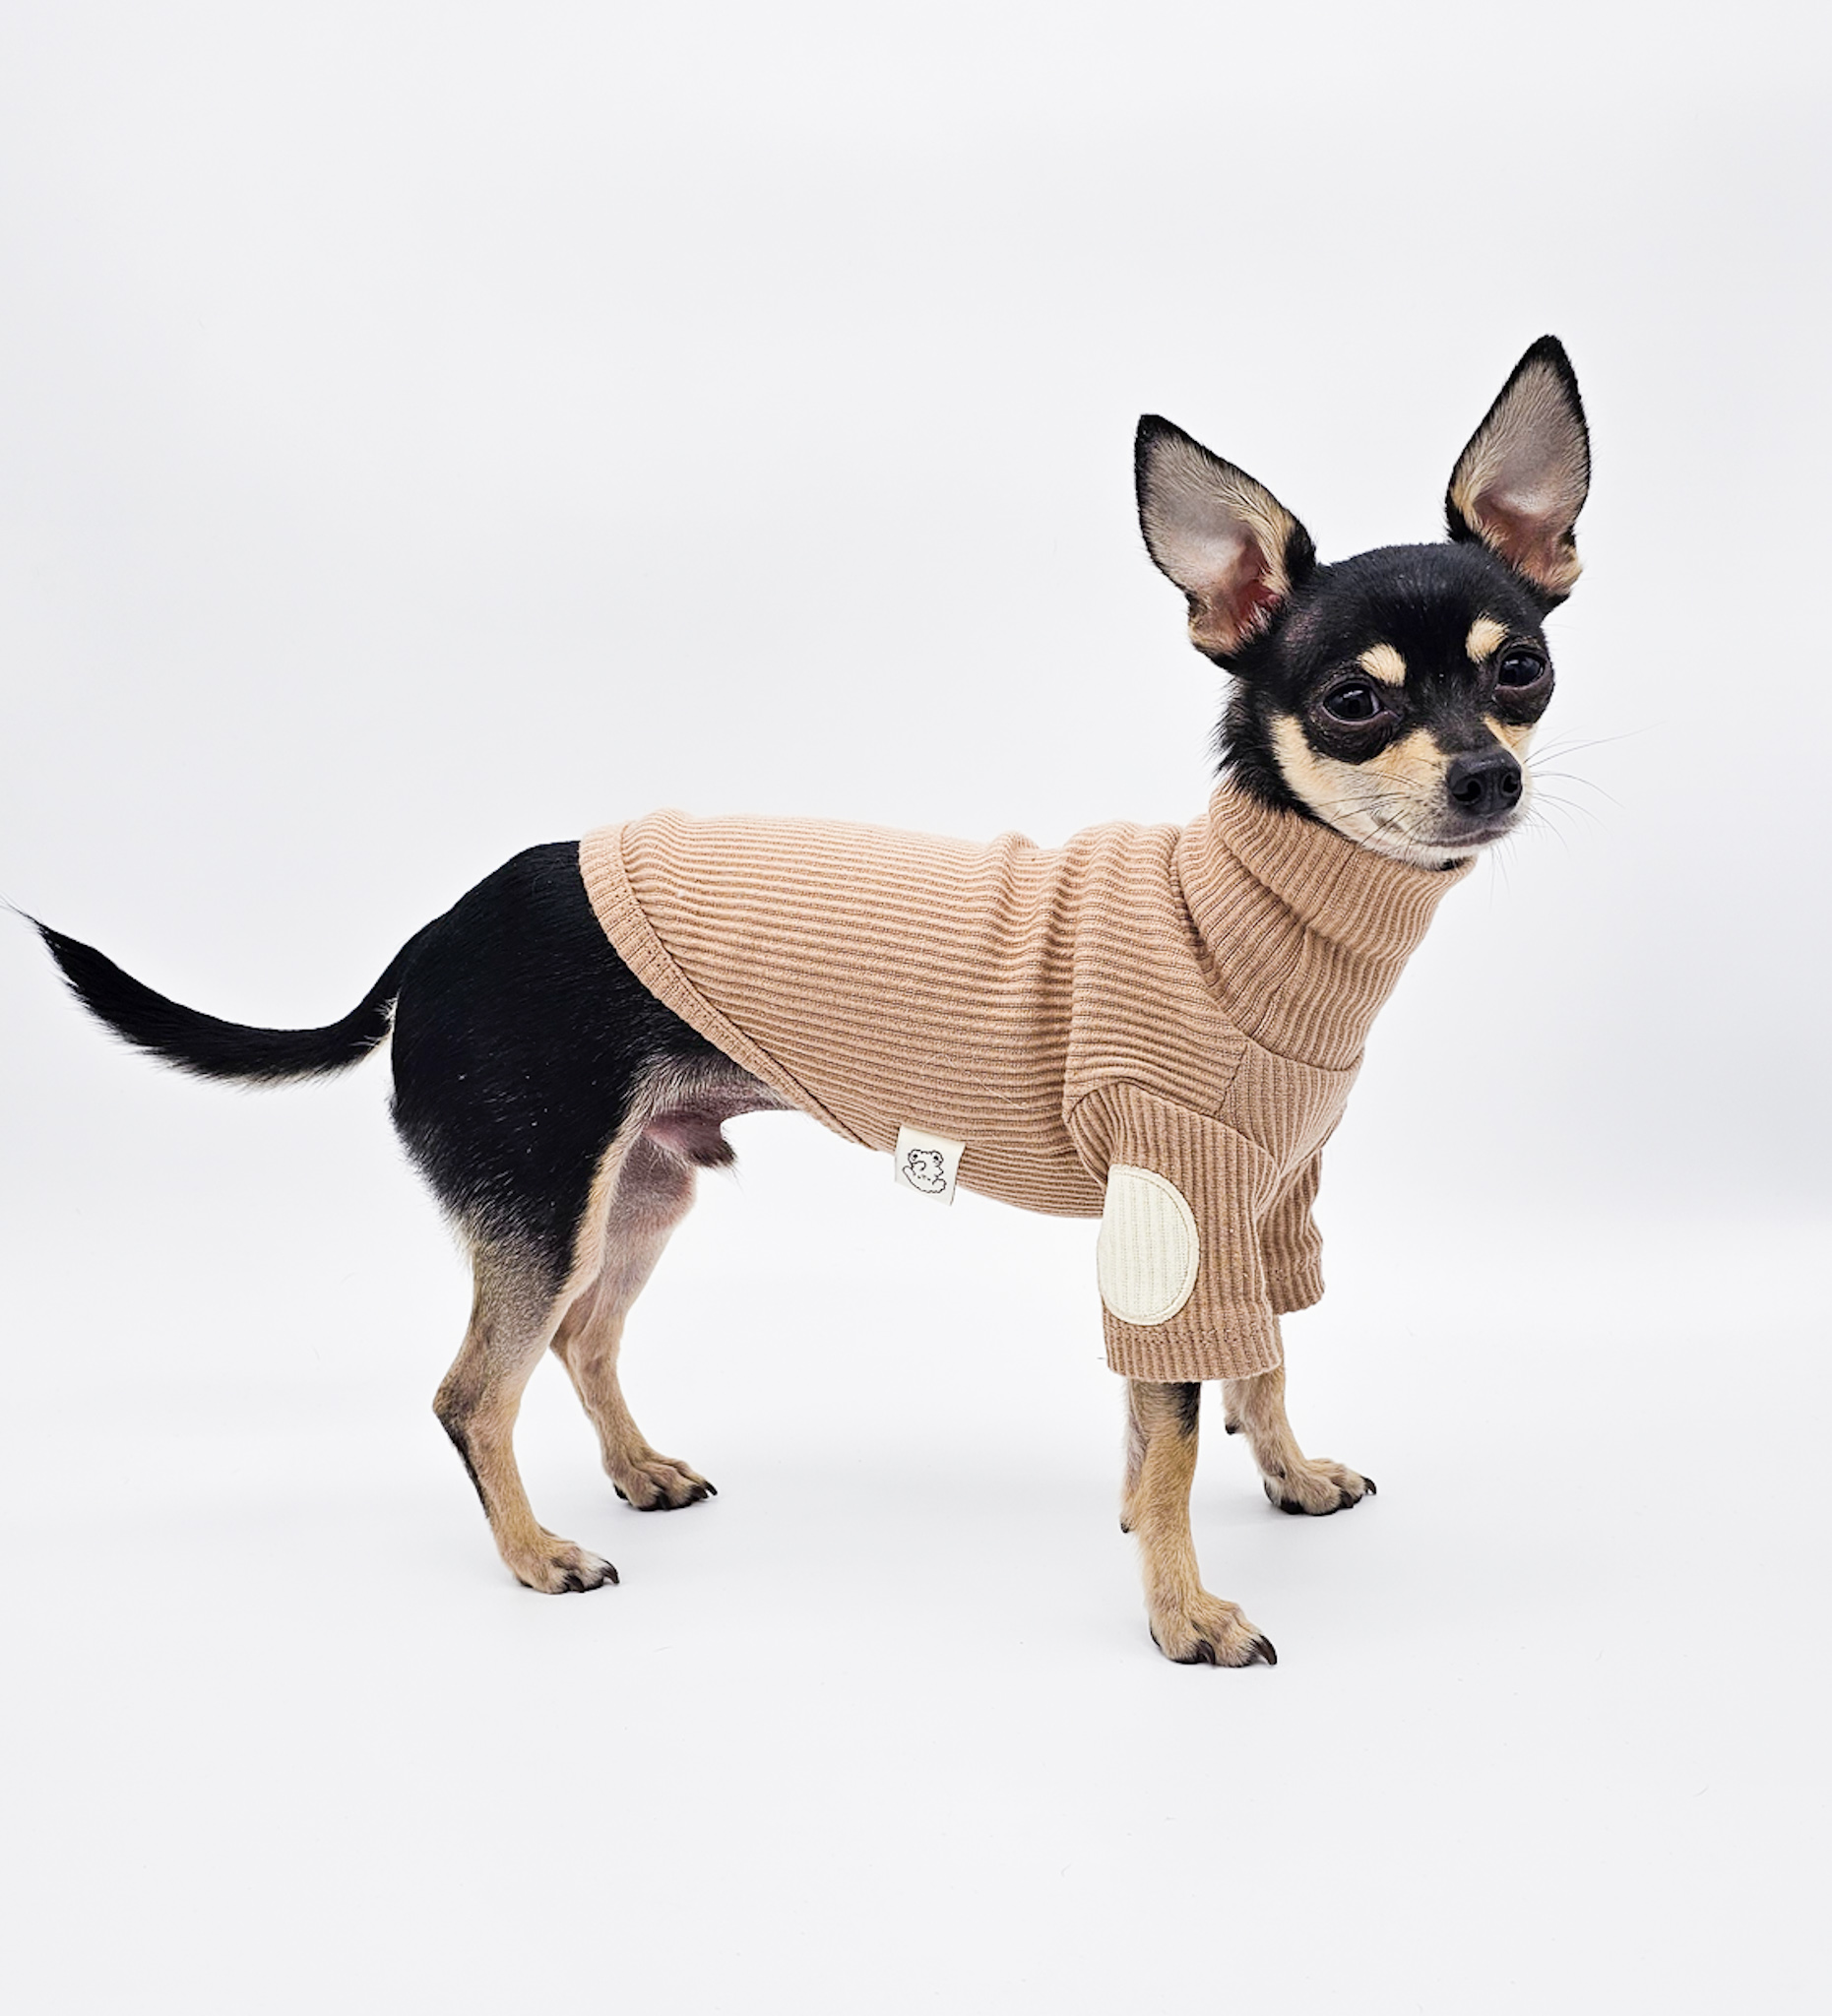 High-End Turtleneck Ribbed Sweater for Small Dogs | The Chi SocietyHigh-End Turtleneck Ribbed Sweater for Small Dogs | The Chi Society